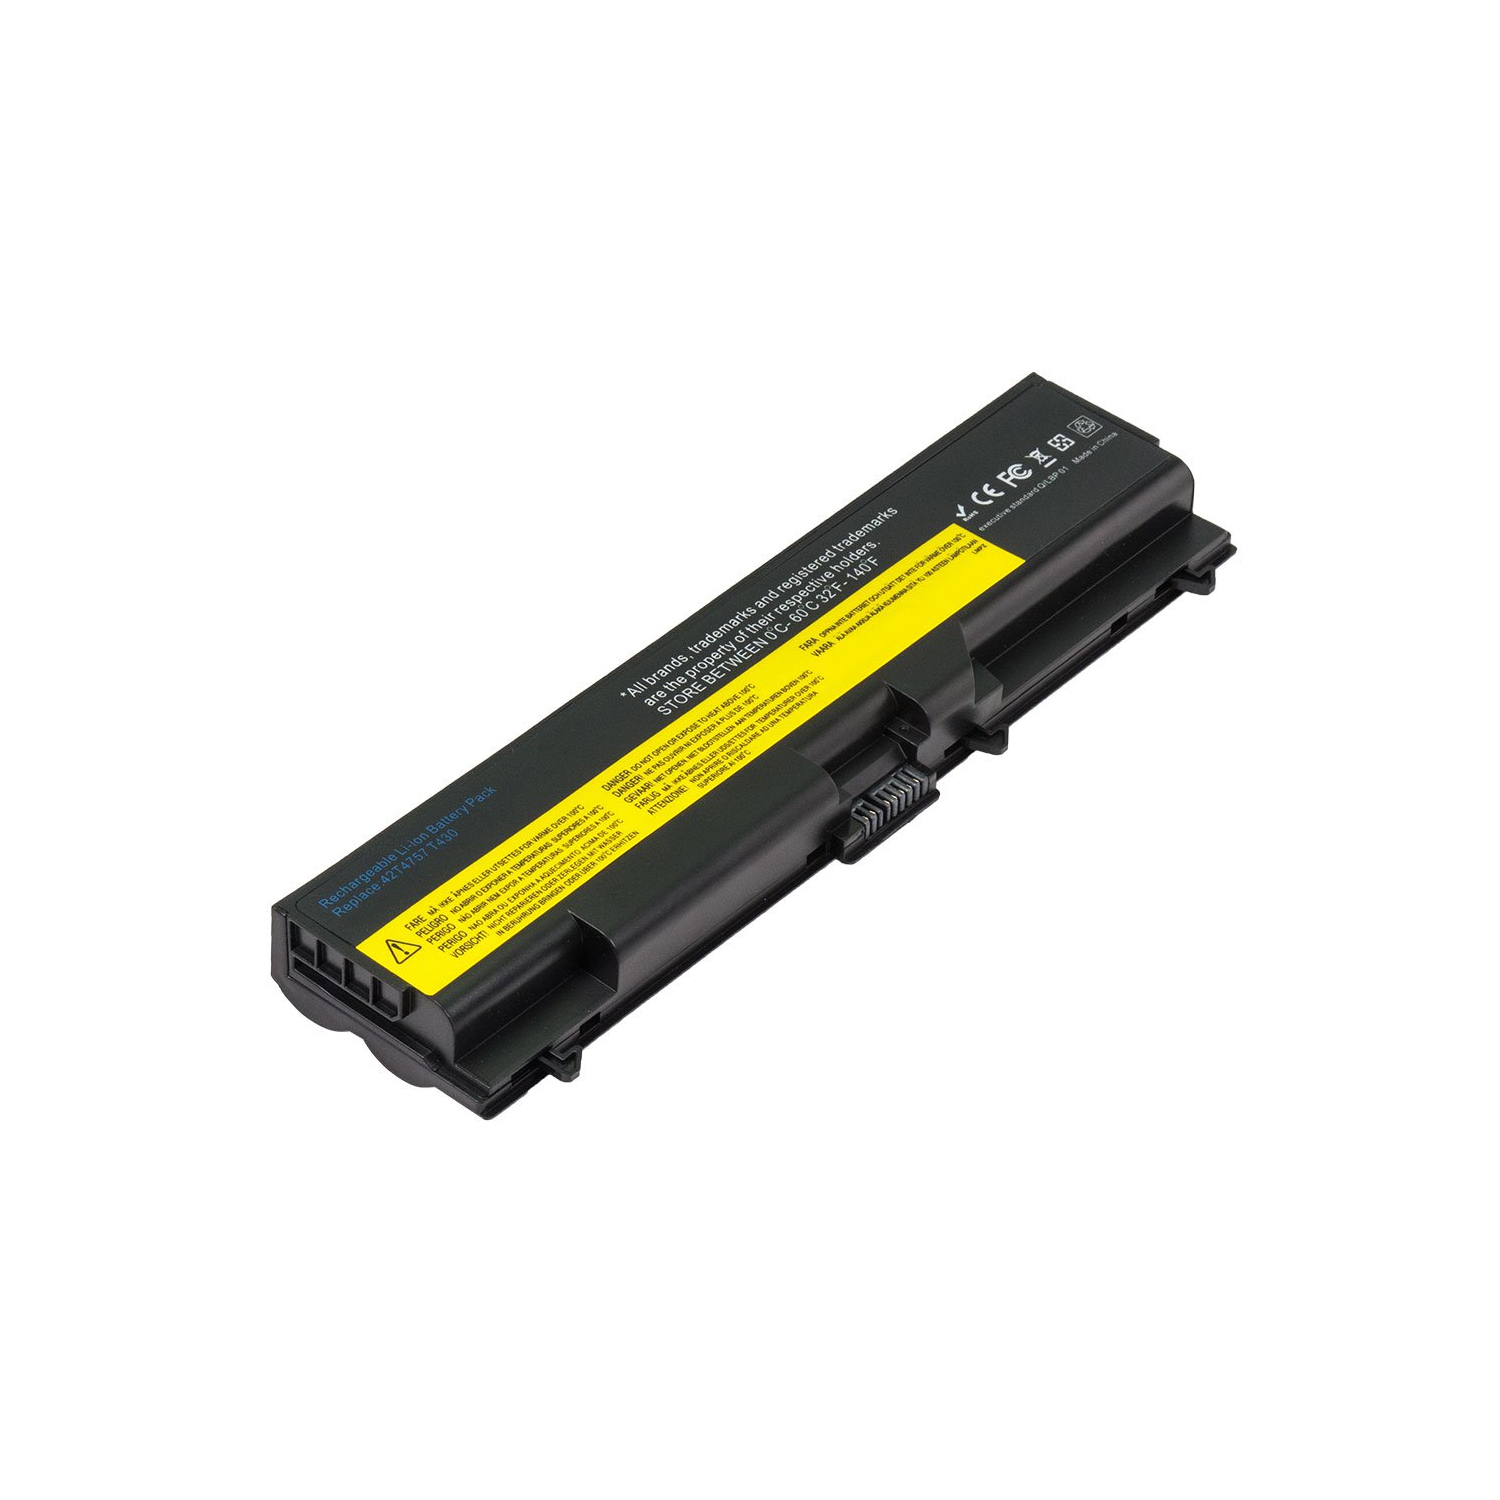 Laptop Battery Replacement for Lenovo ThinkPad W530 2436, 42T4712, 42T4737, 42T4763, 42T4797, 42T4921, 0A36303